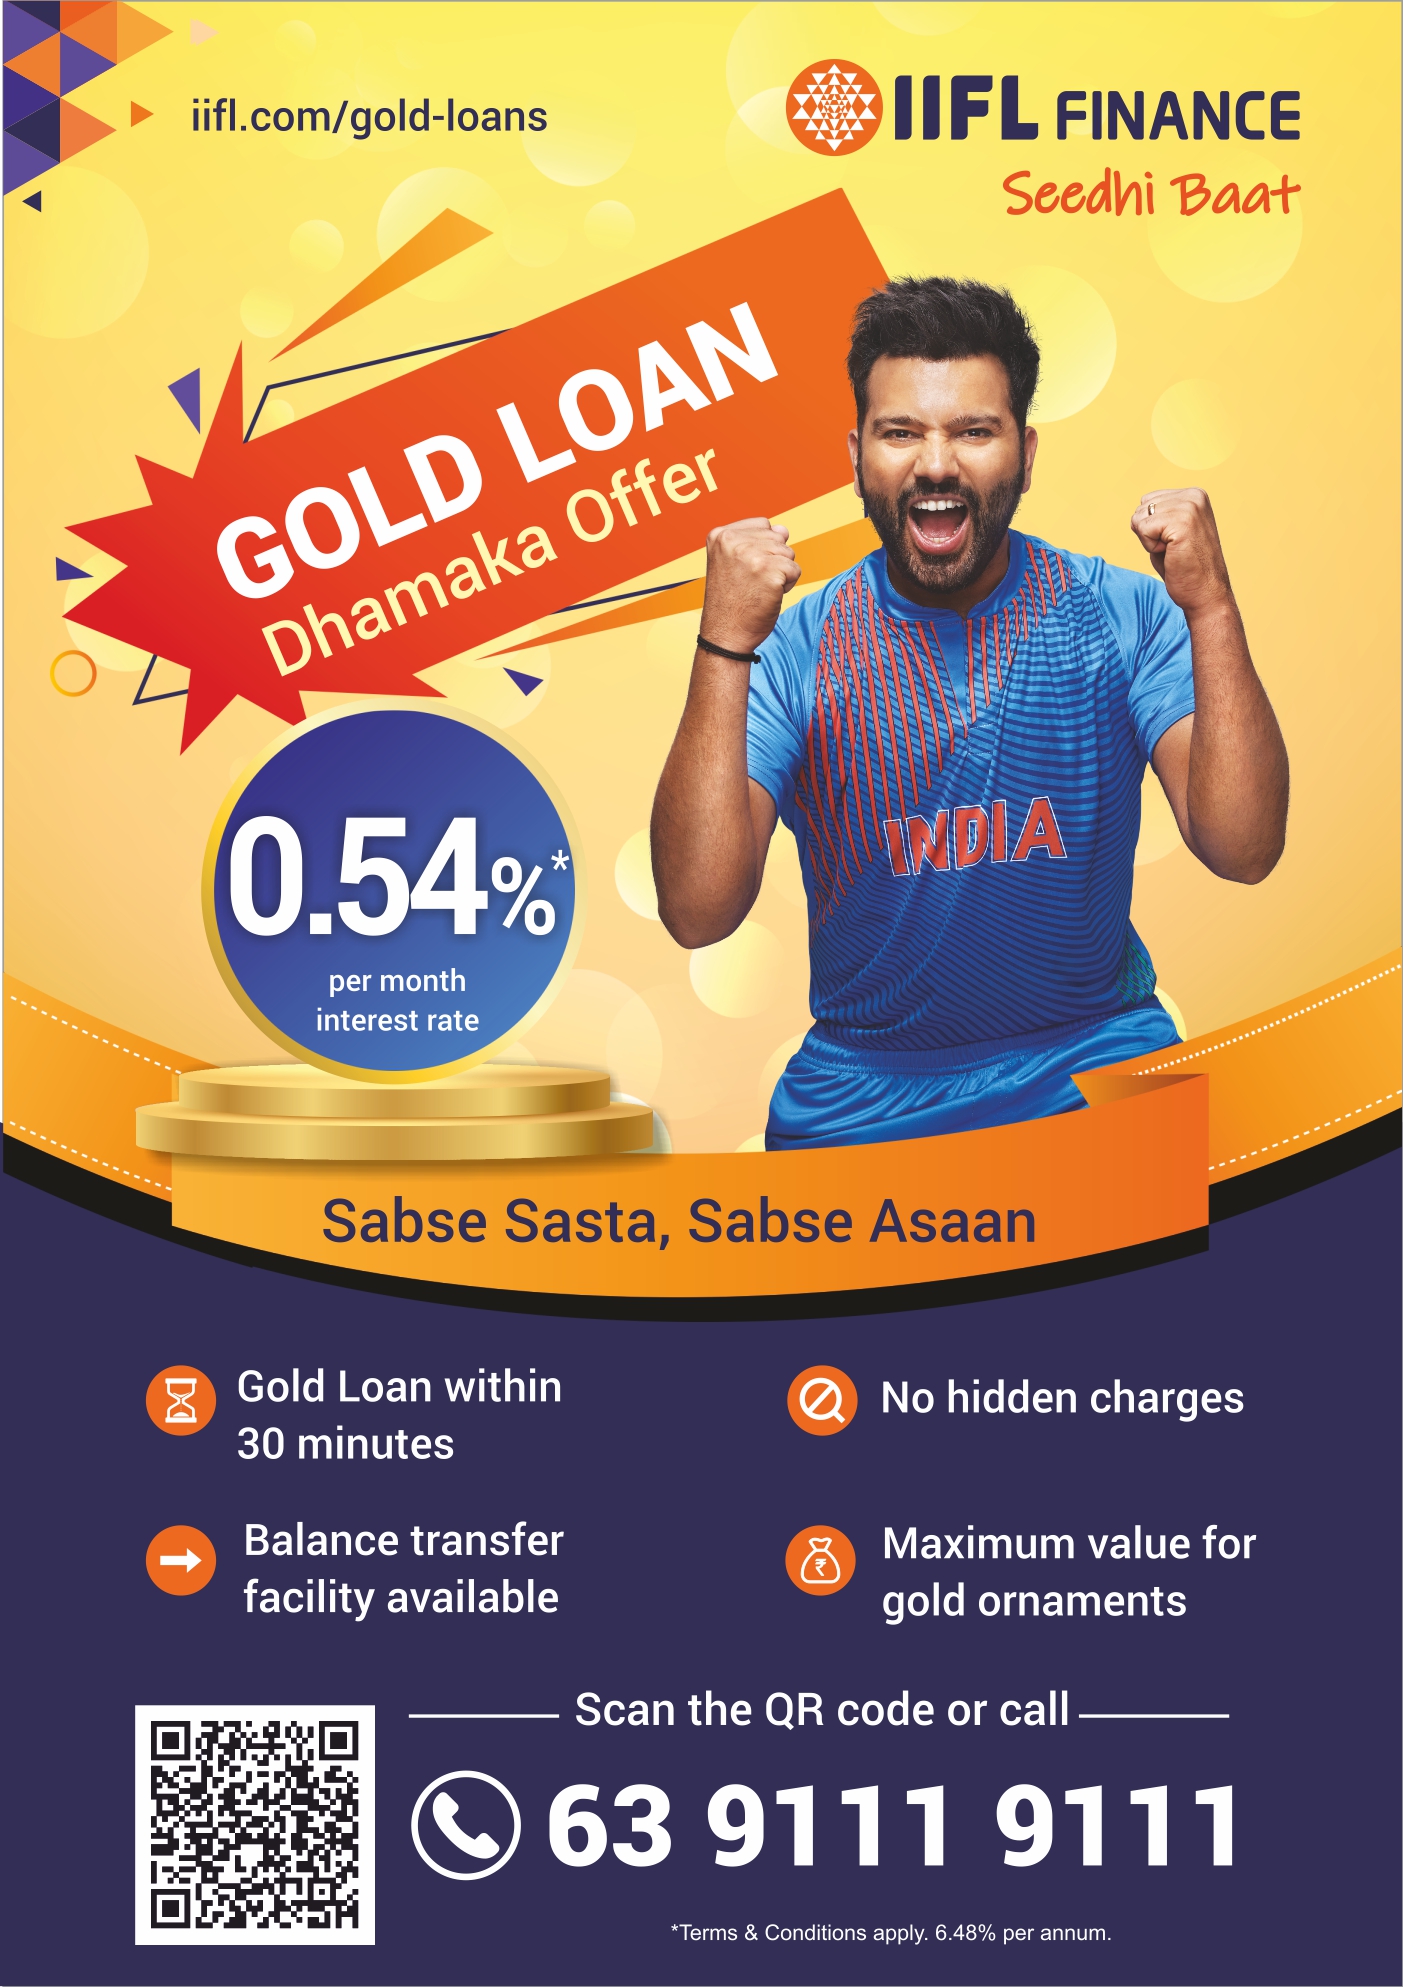 IIFL Finance offers gold loan at lowest rate of 0.54% per month decoding=